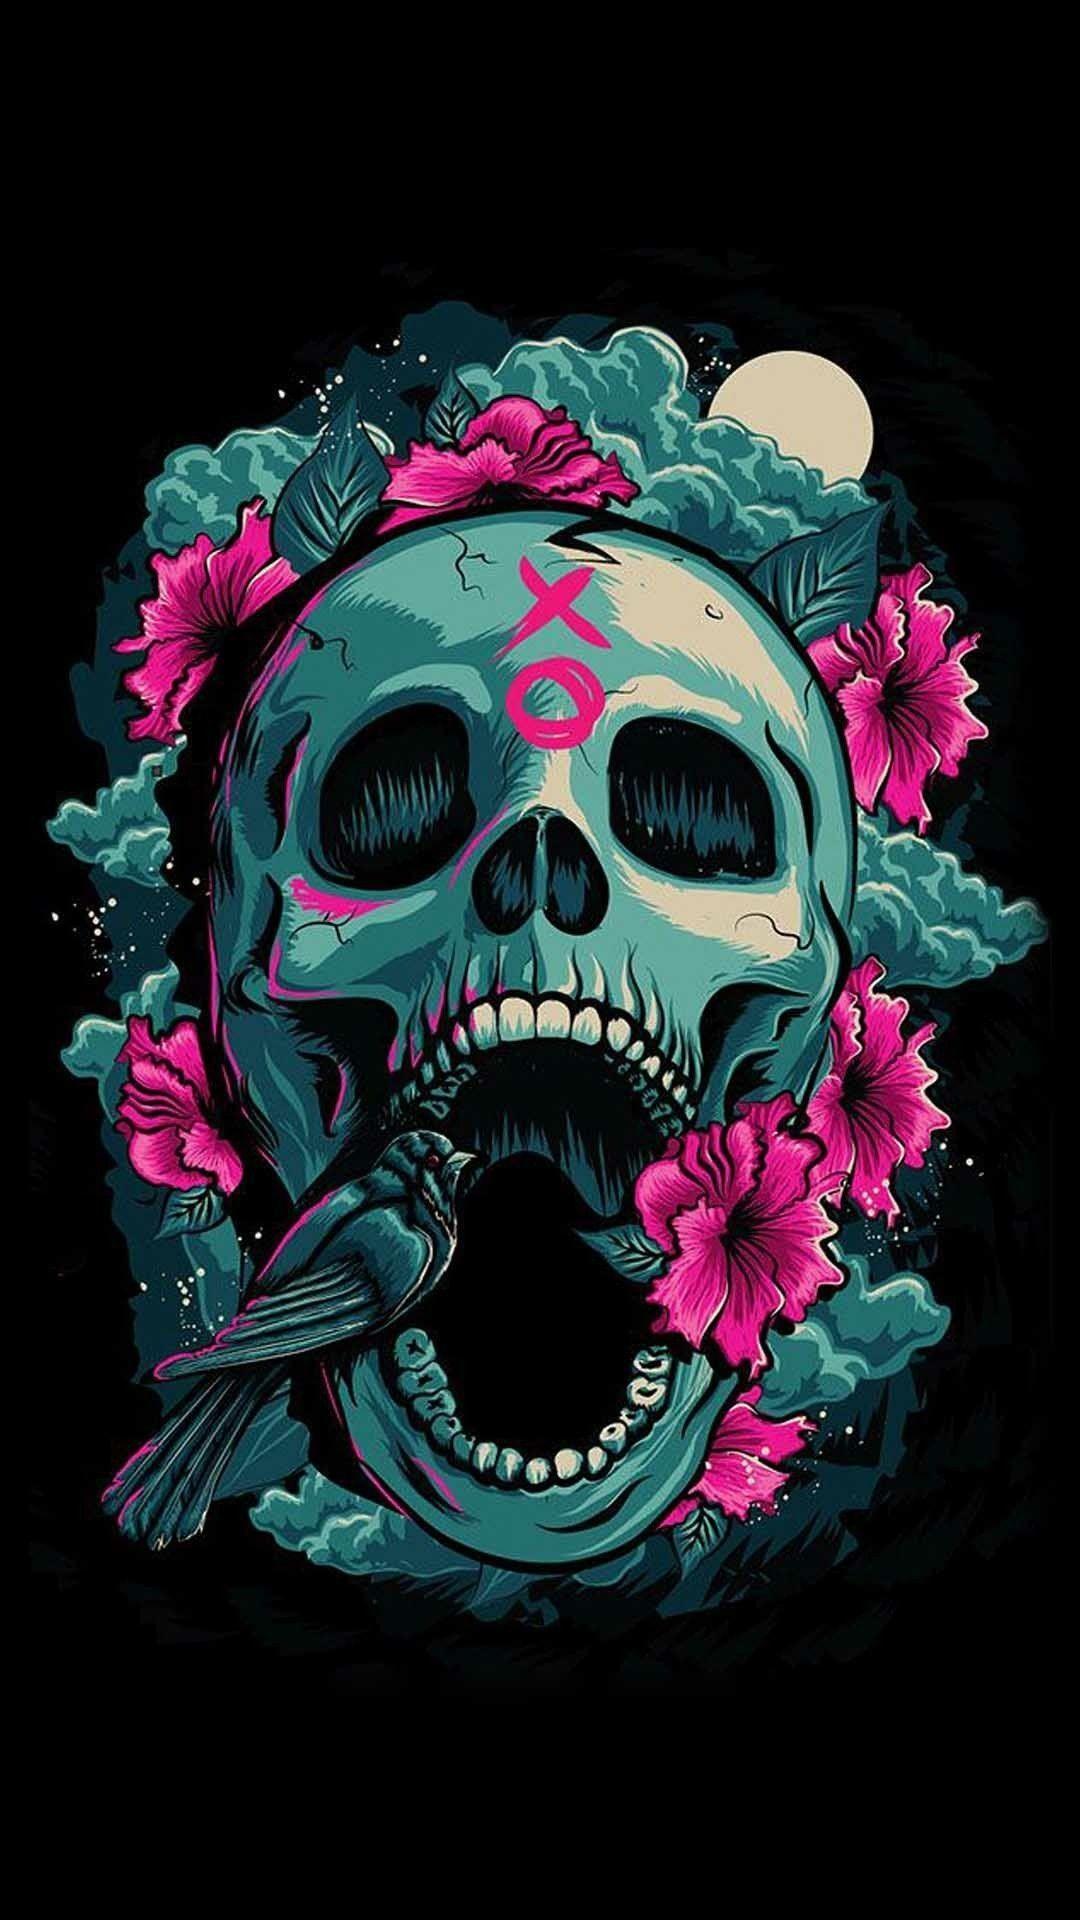 Download Thunder Skull wallpaper by My Name is Bone  79  Free on ZEDGE  now Browse millions of popula  Skull wallpaper Aries wallpaper Skull  wallpaper iphone